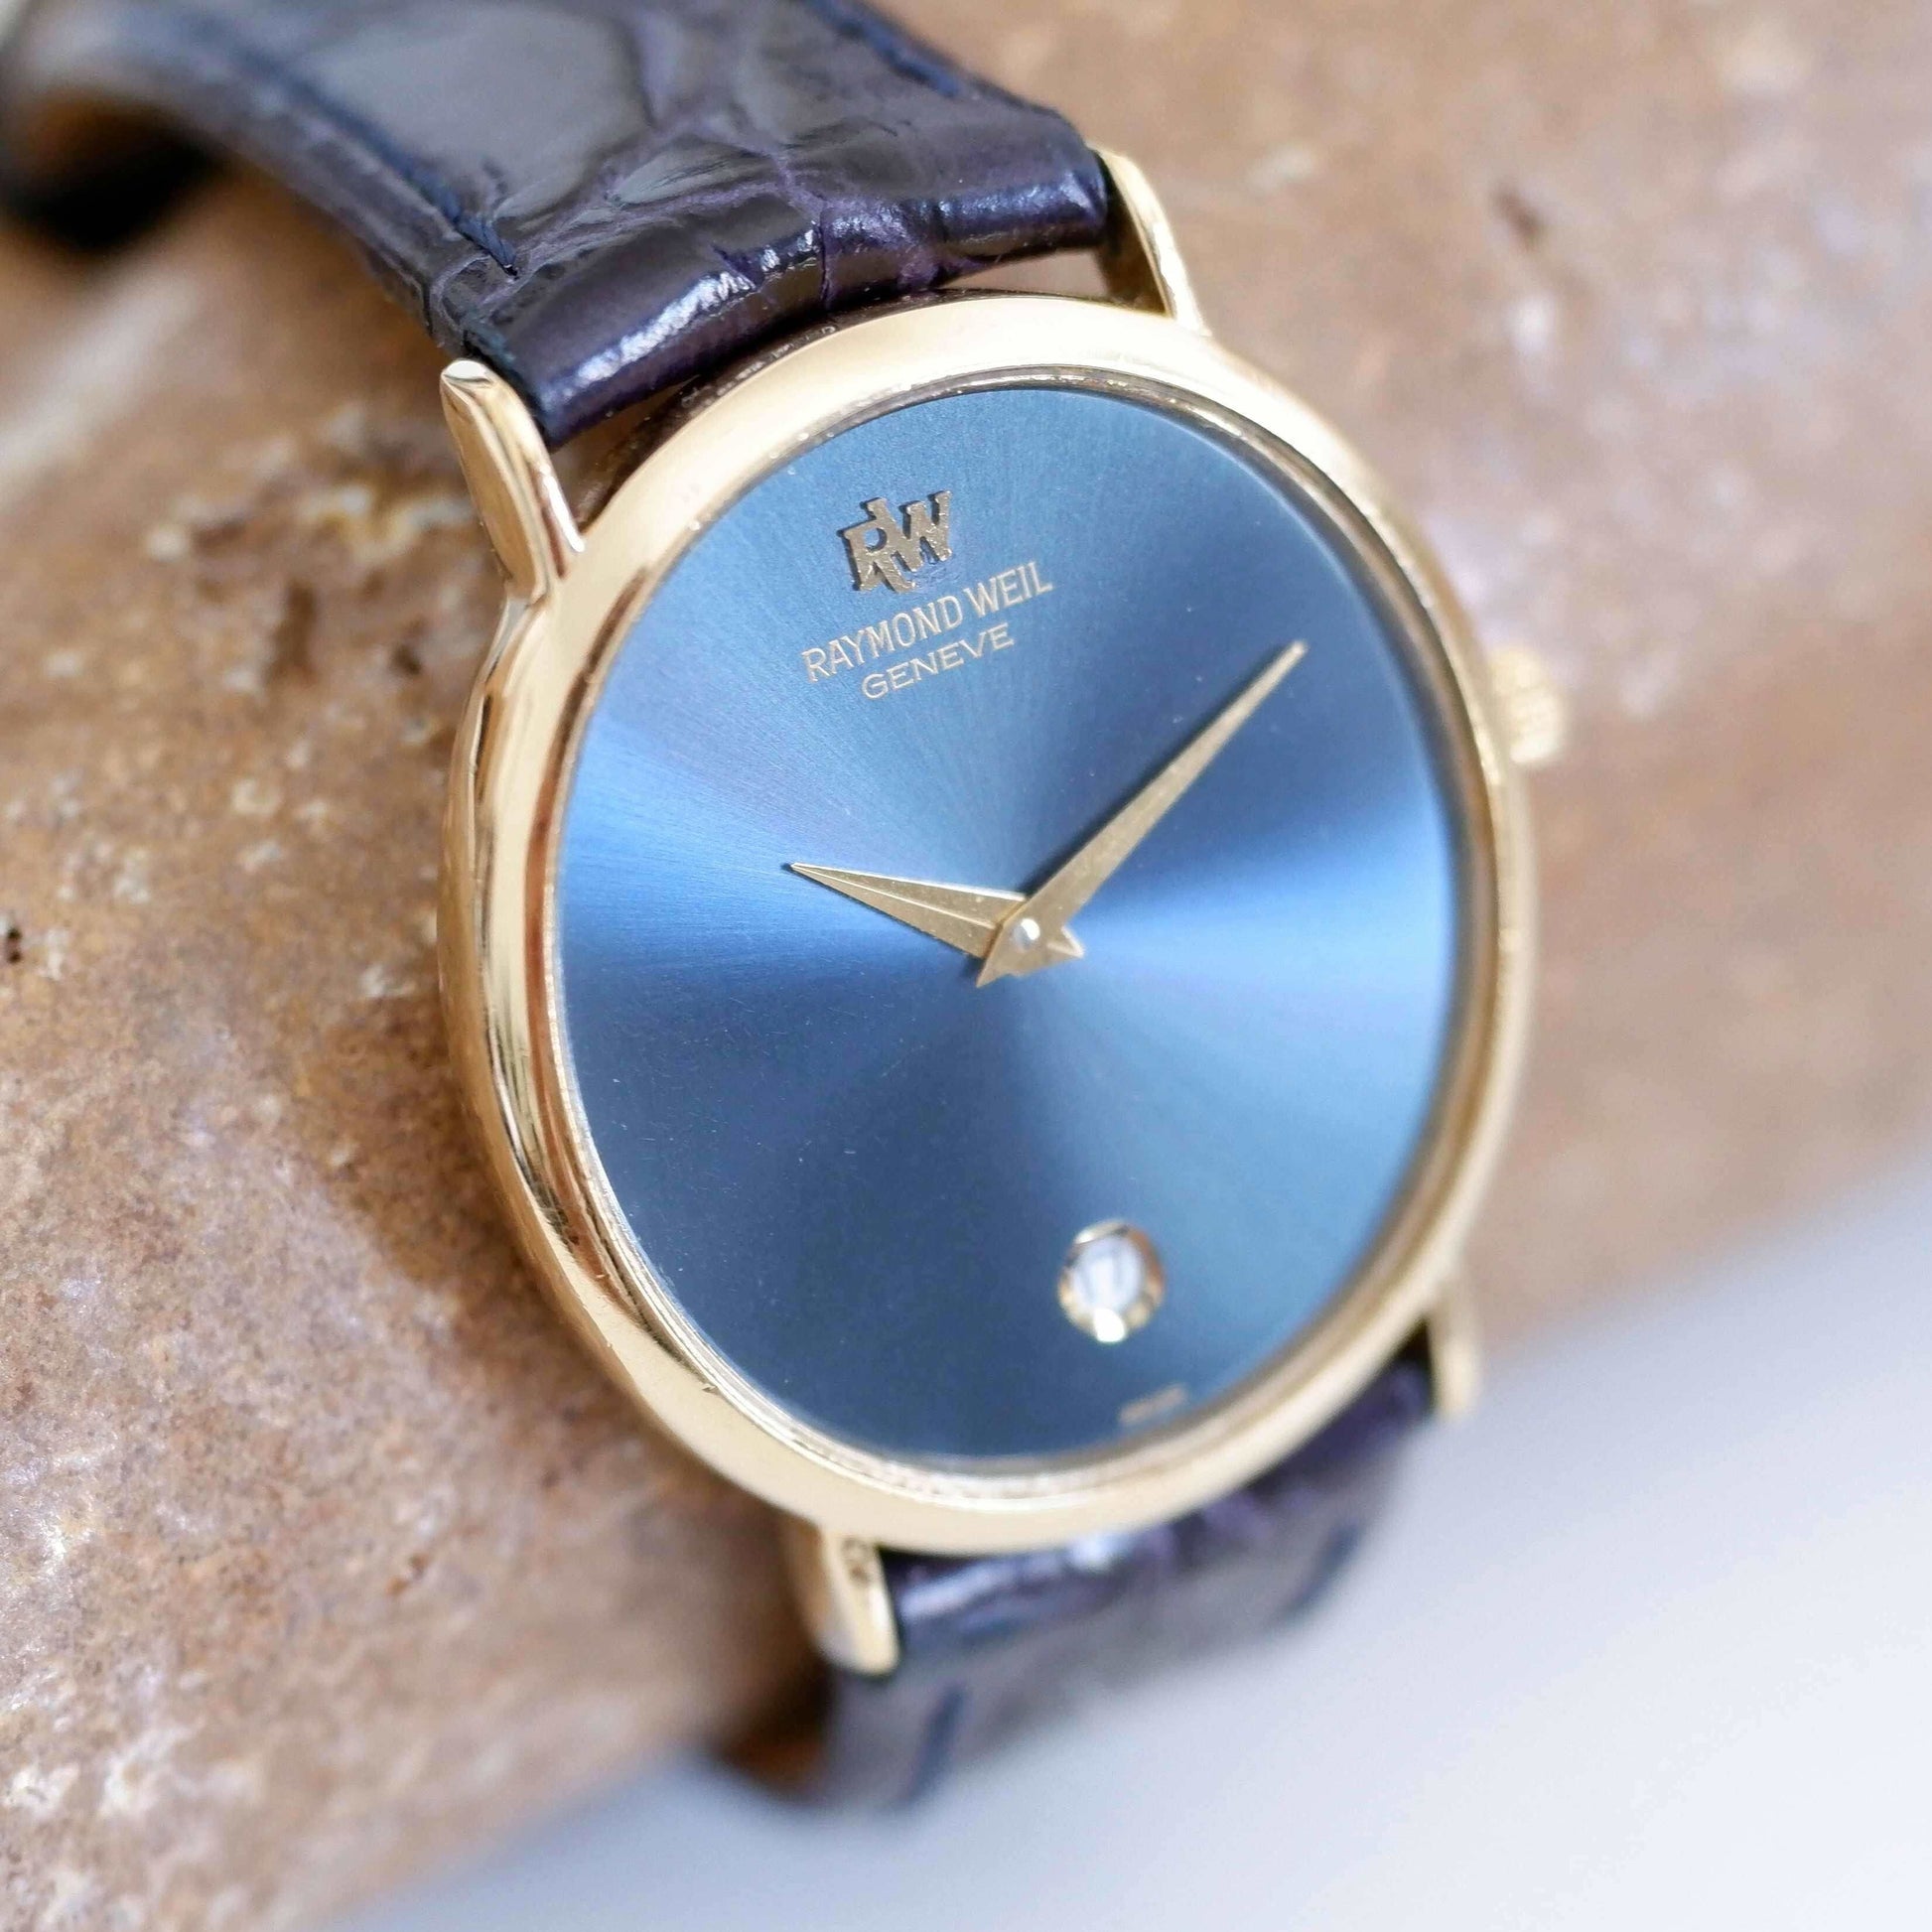 Raymond Weil Vintage Ladies Watch: 90s Golden Oval Style with Blue Sunburst Dial, Second Slight Left Side